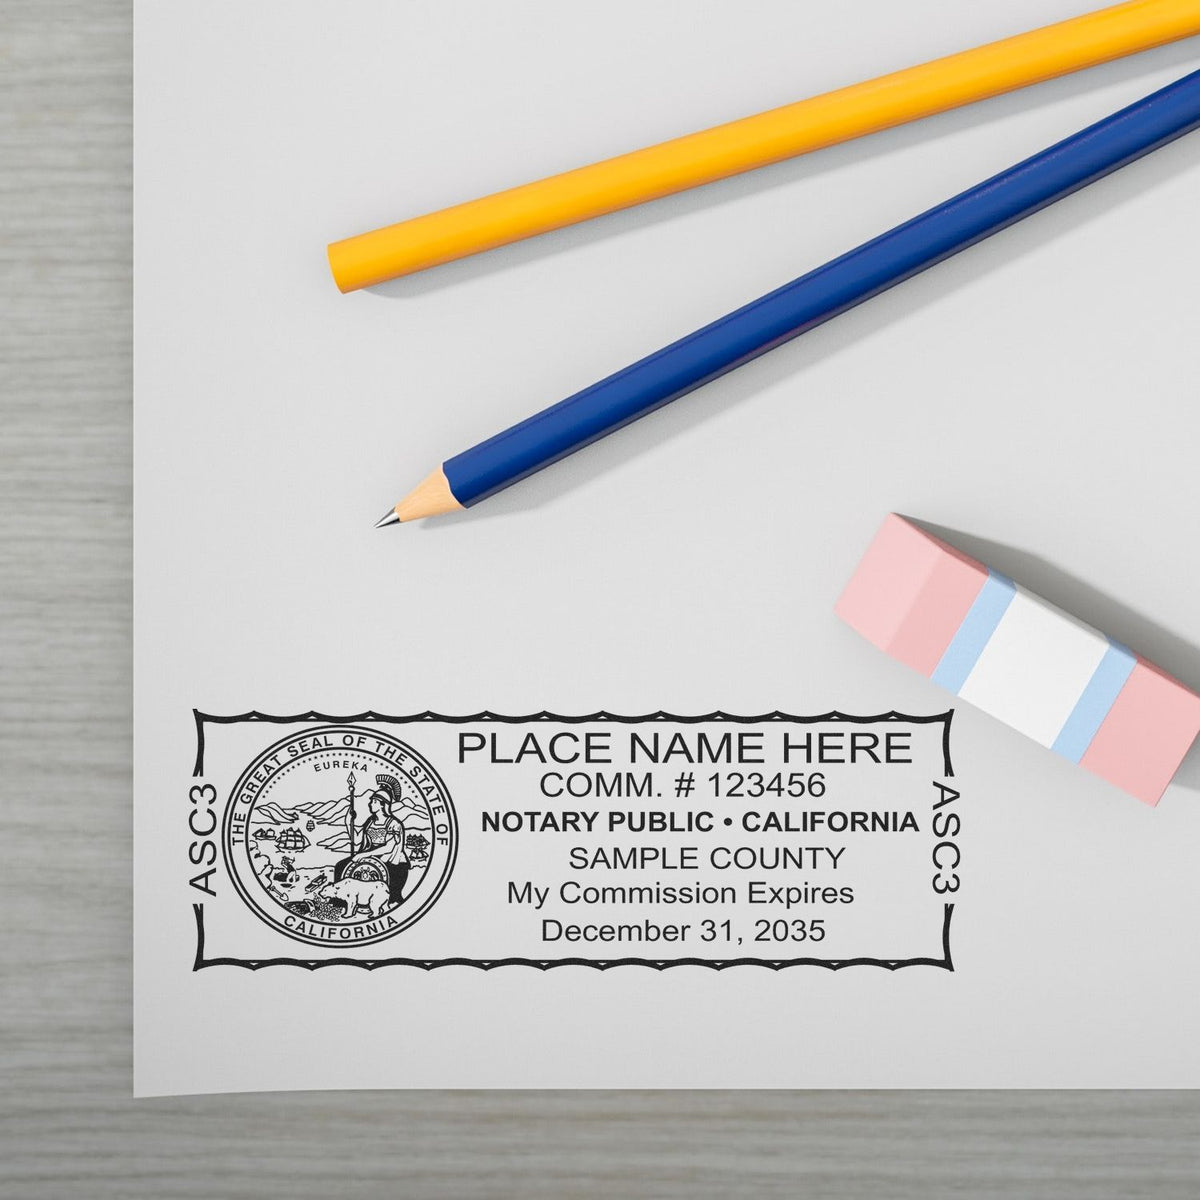 The Super Slim California Notary Public Stamp stamp impression comes to life with a crisp, detailed photo on paper - showcasing true professional quality.